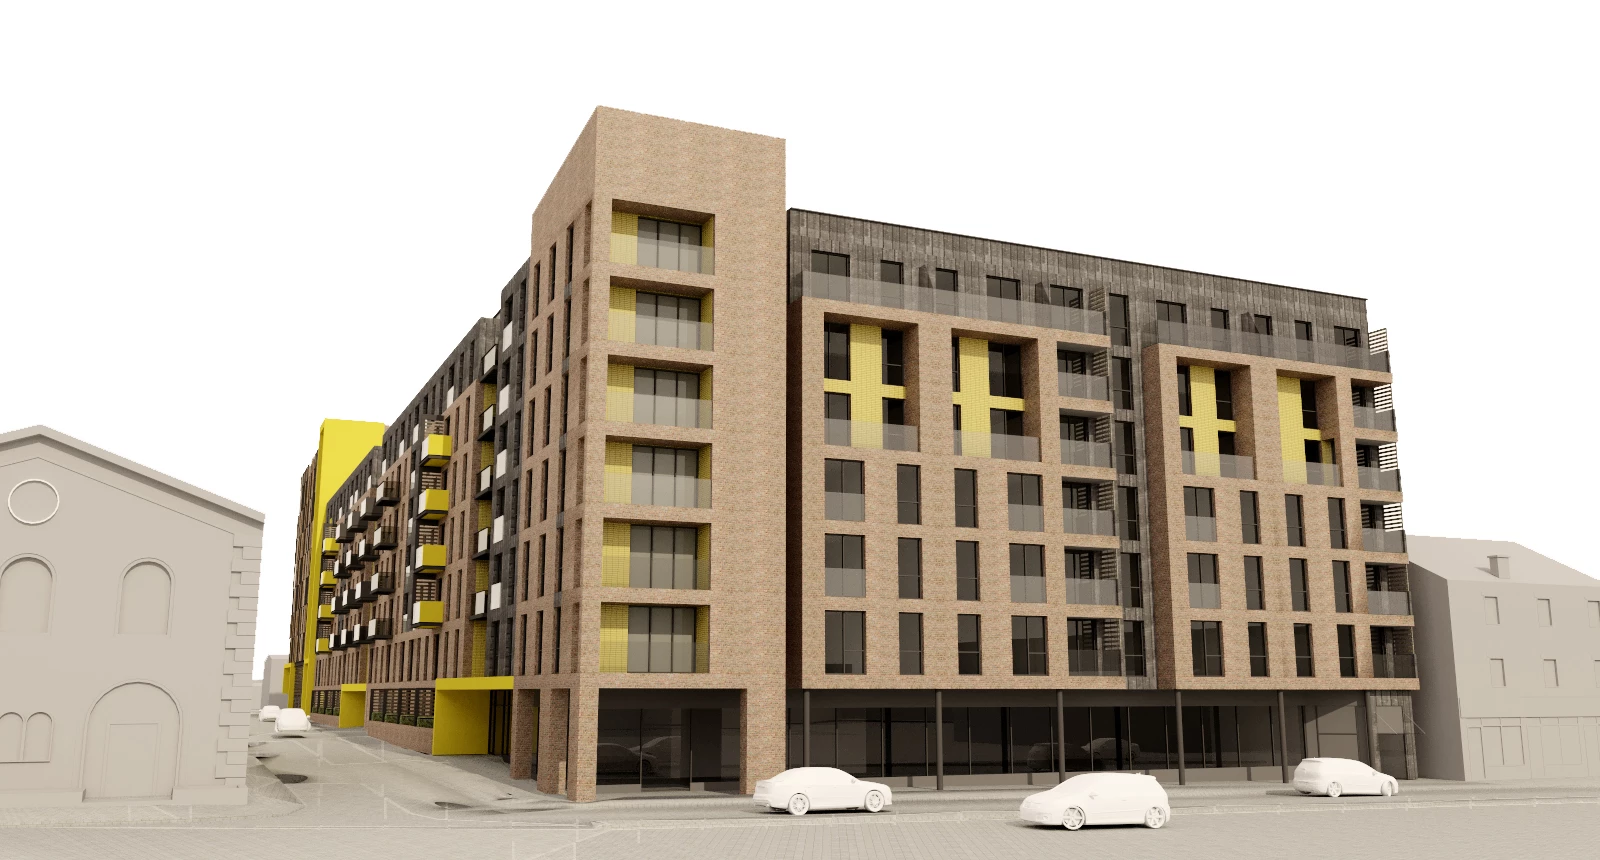 How the John Street apartment building will look.